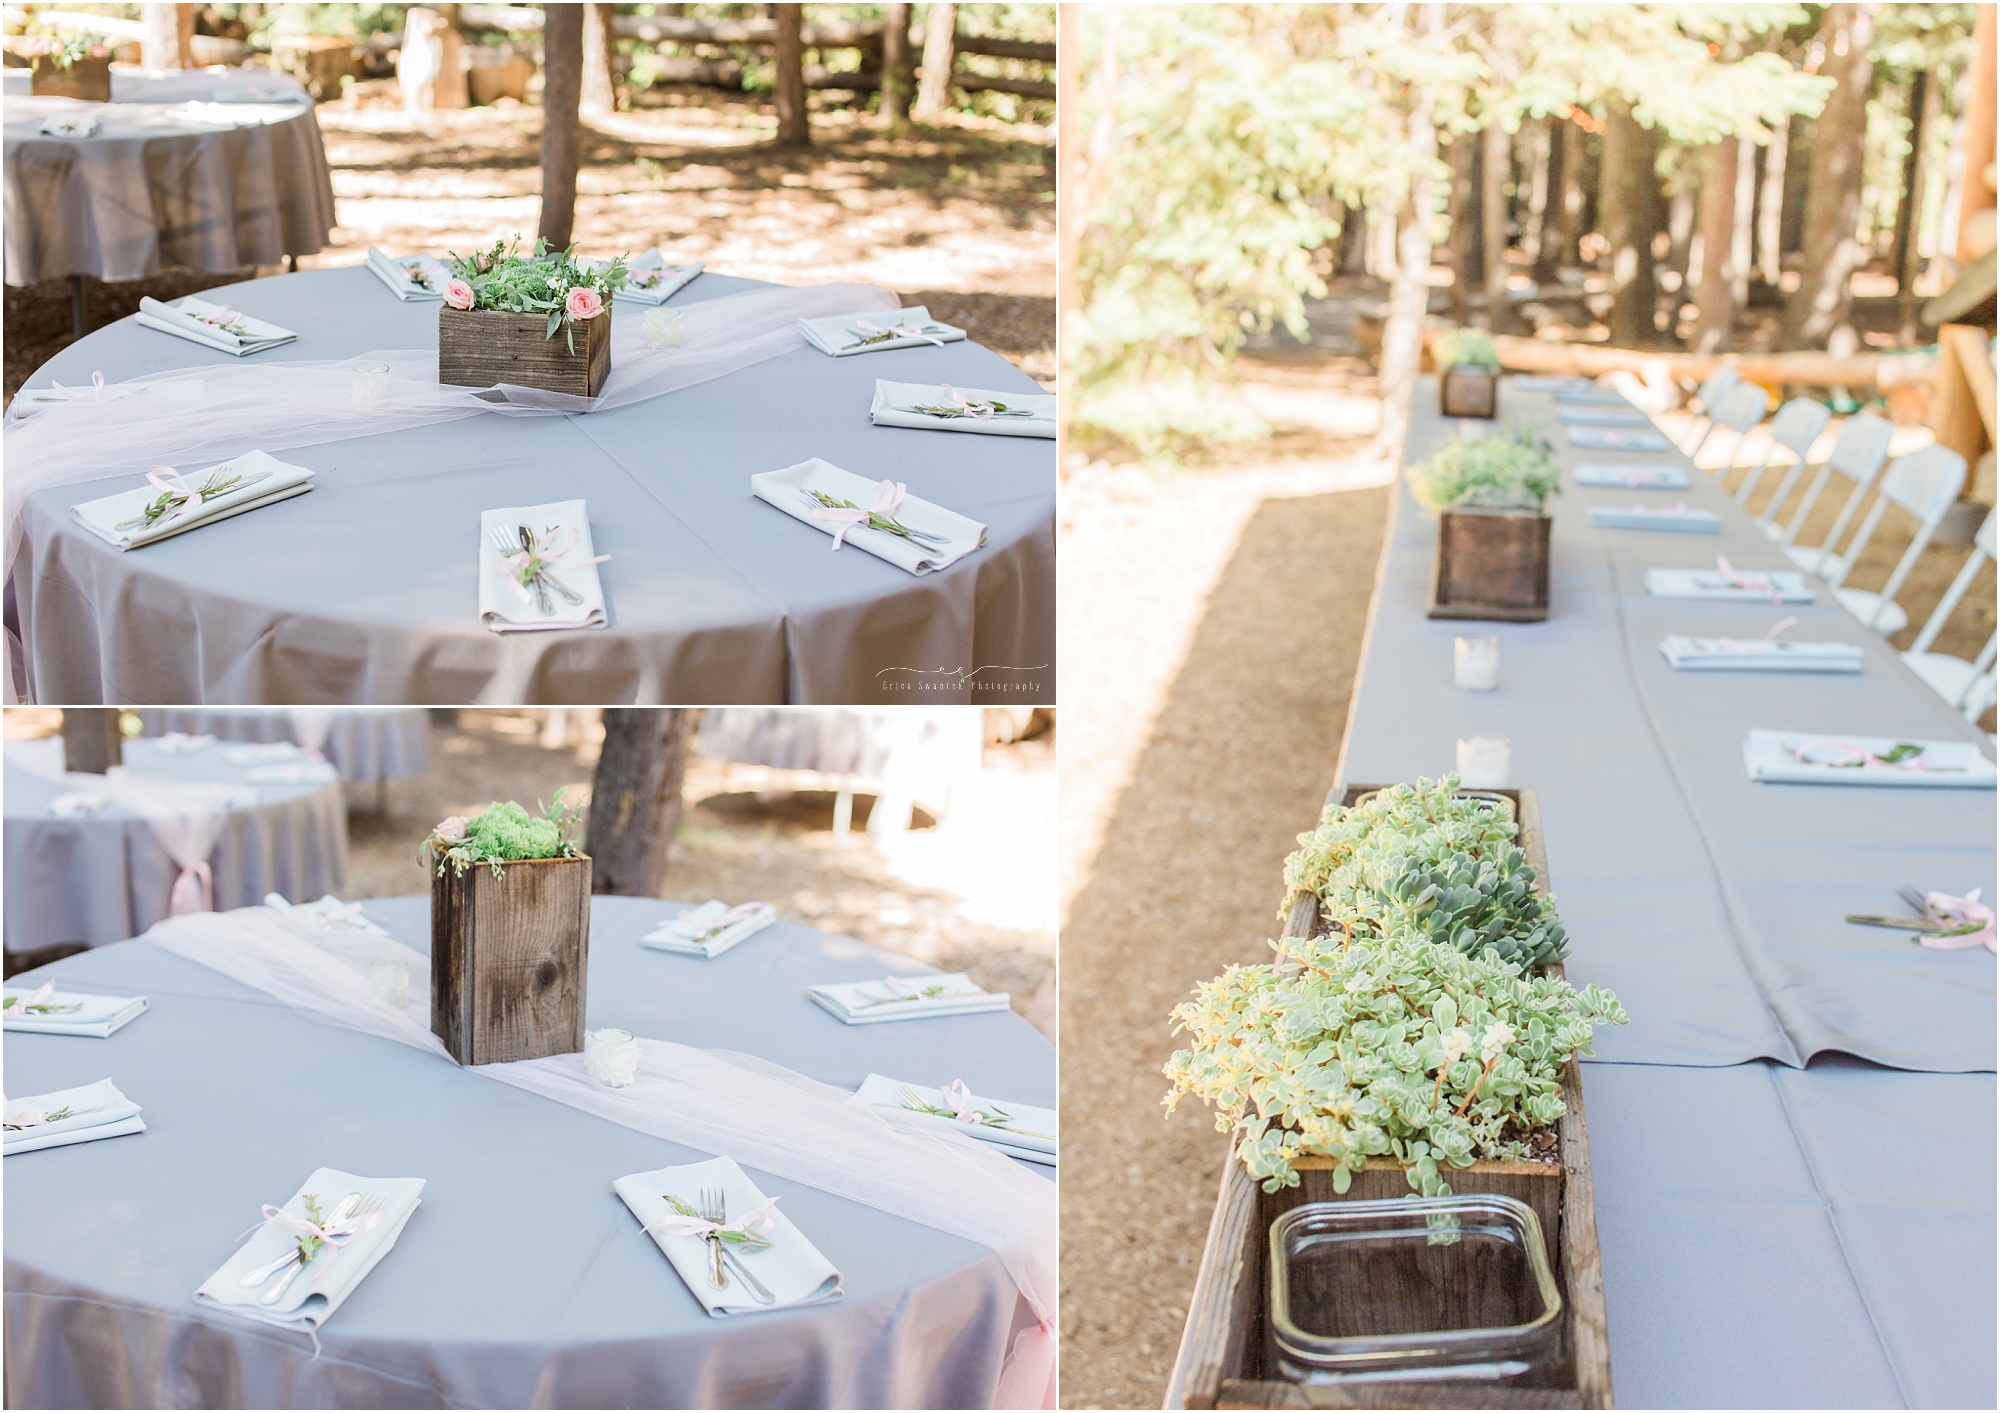 All the tables set up outside on this gorgeous summer for this gorgeous rustic Oregon lodge wedding in Central Oregon! 